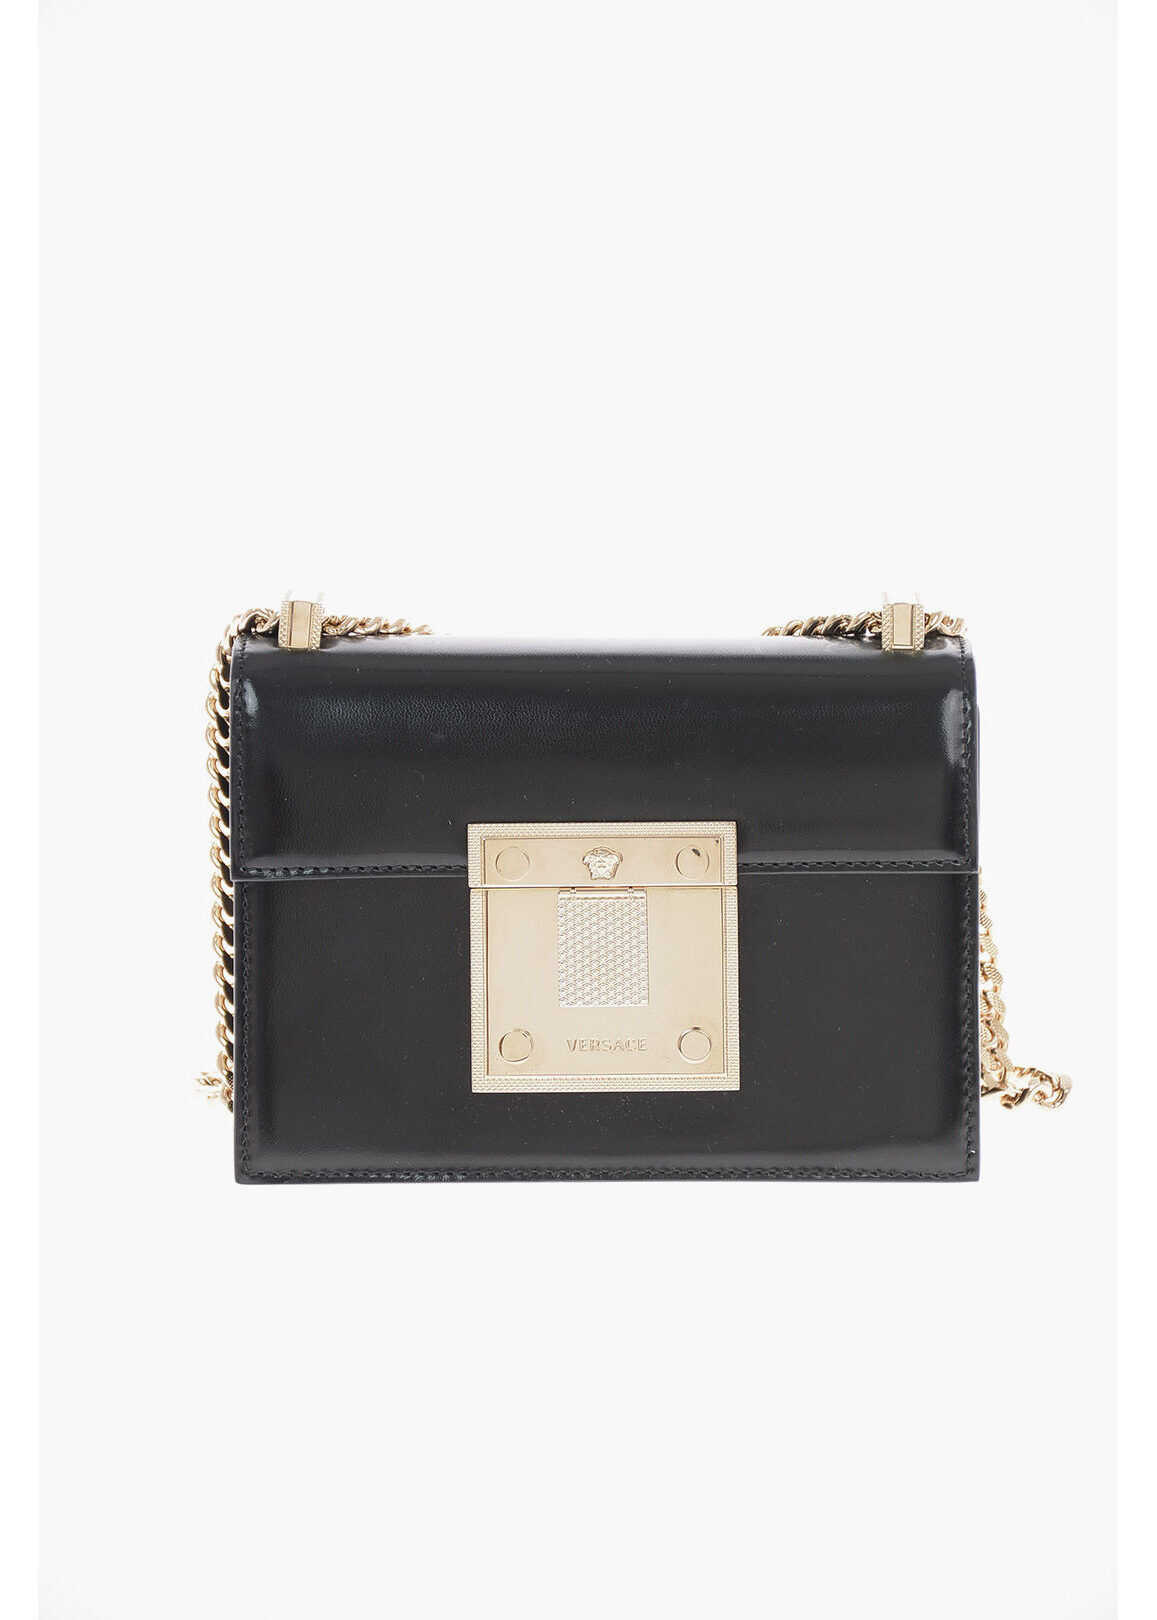 Versace Brushed Leather Diamante Mini Bag With Shoulder Chain Black